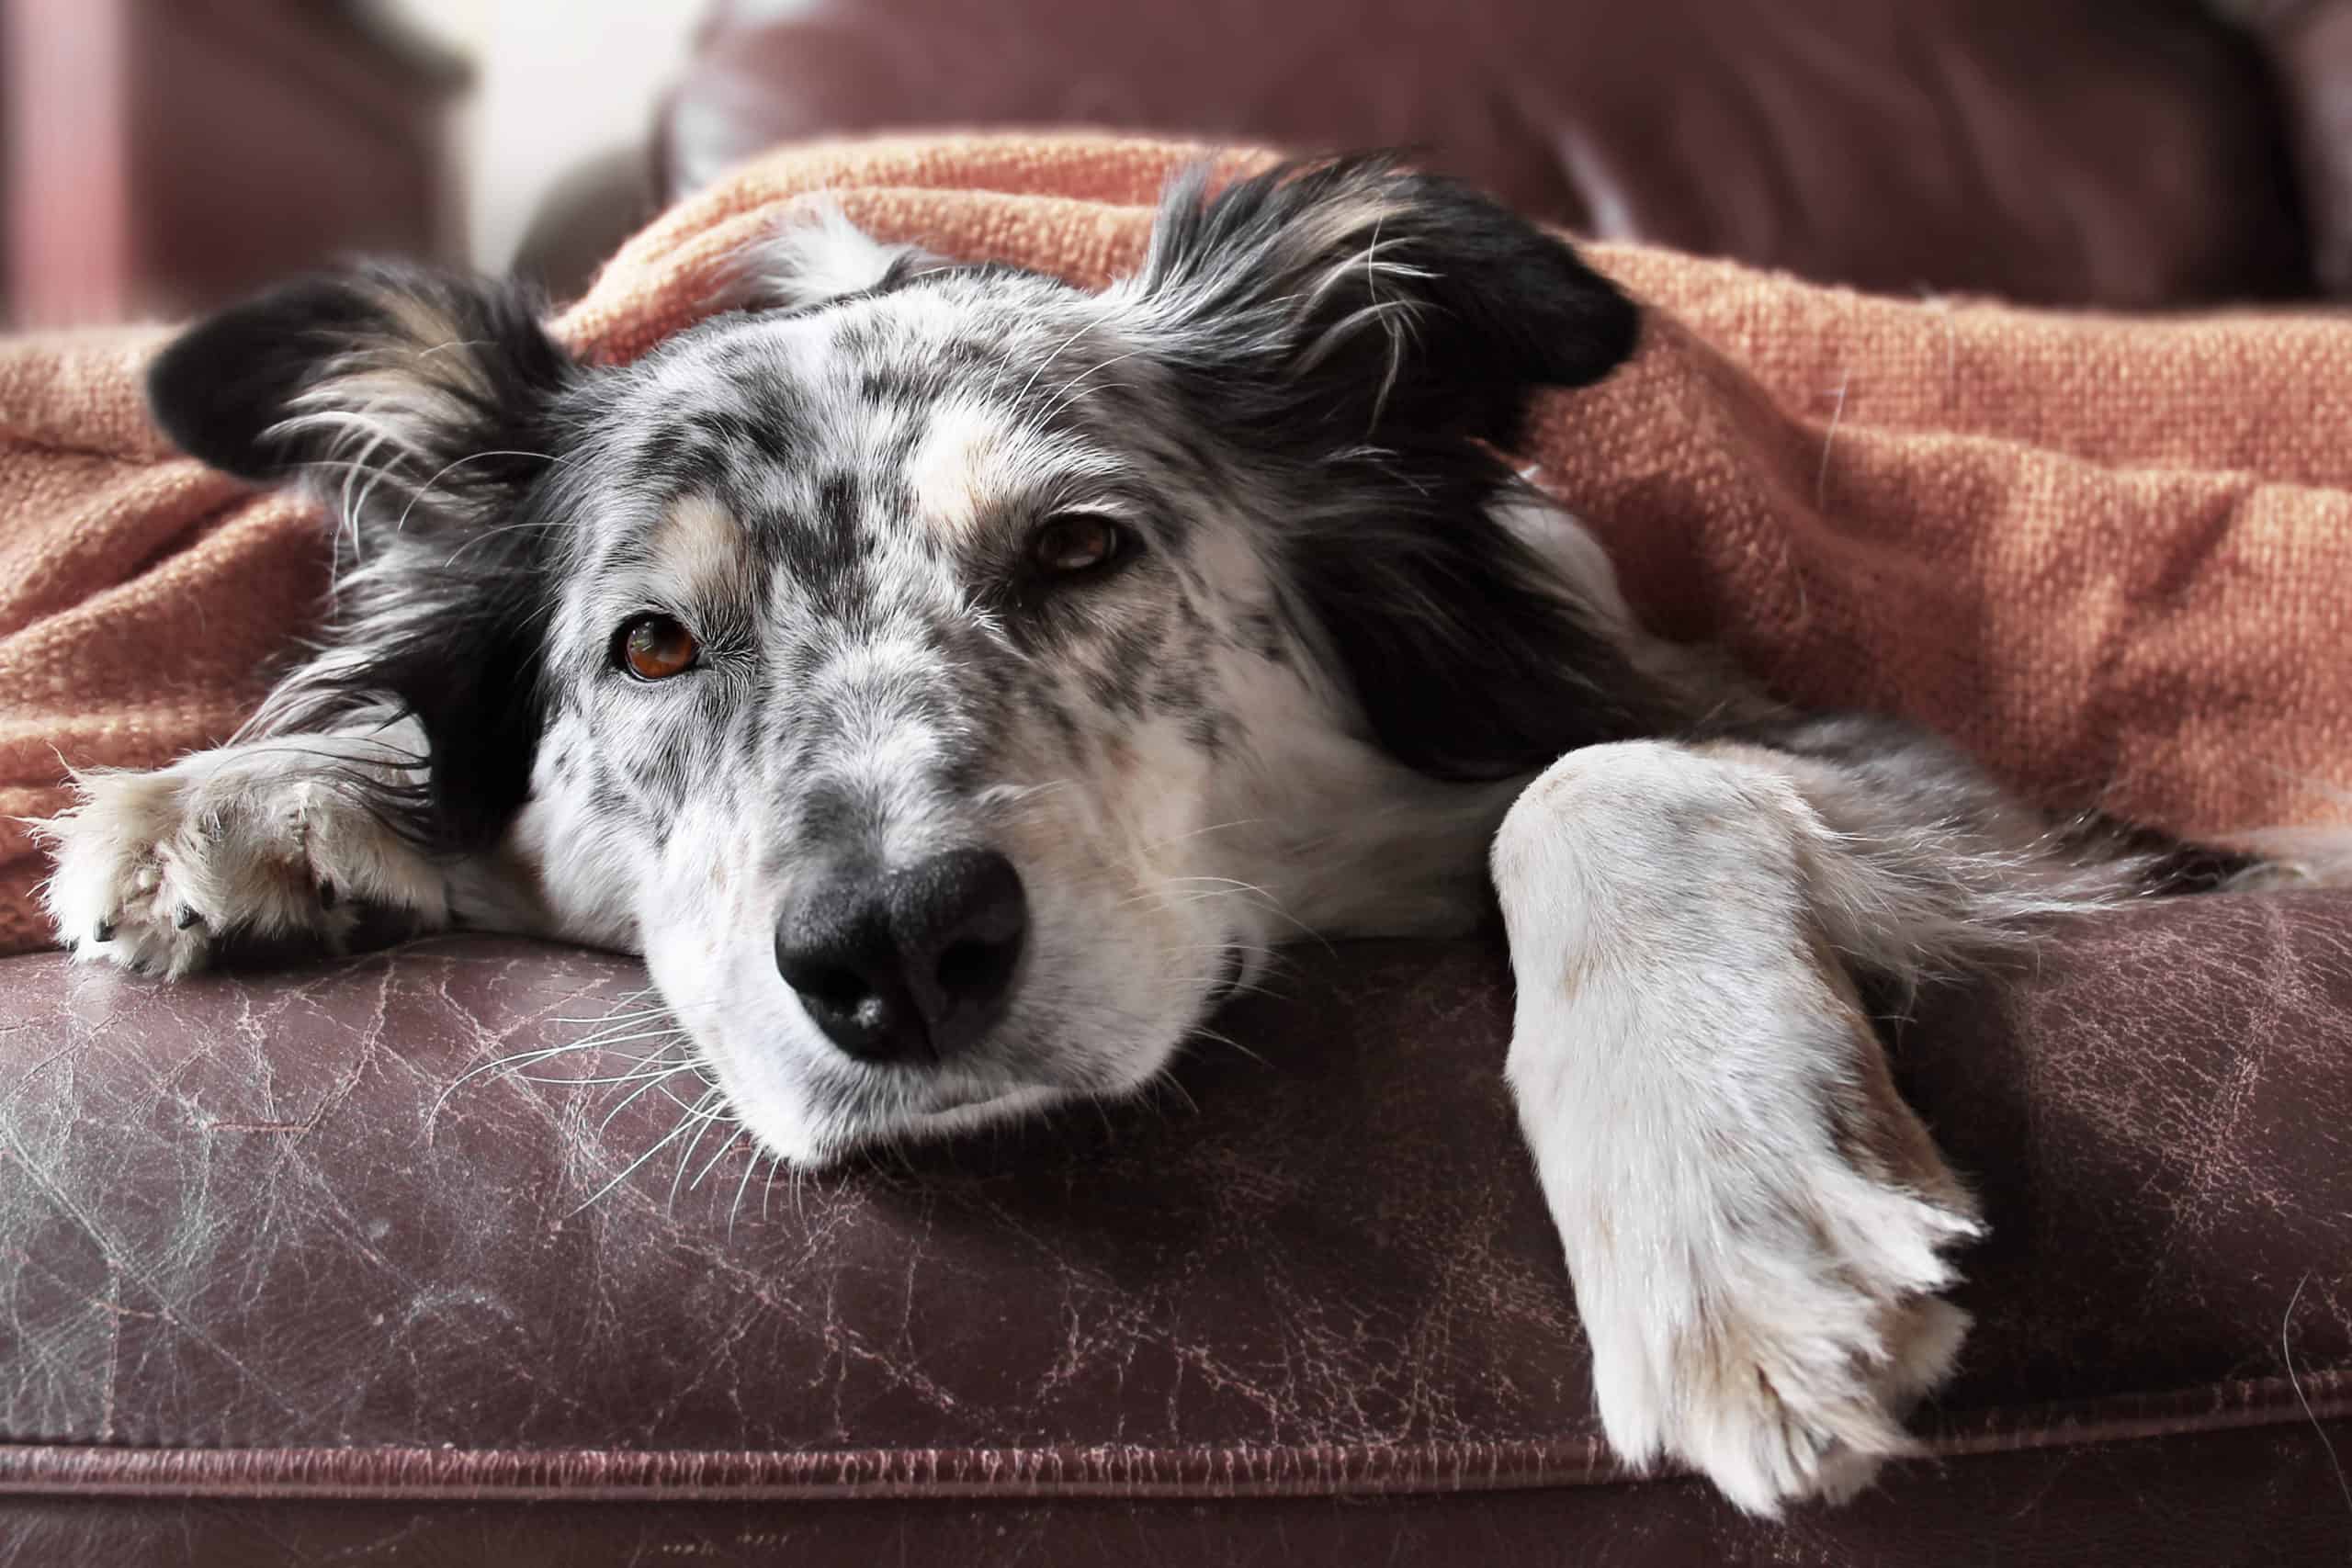 Do dogs die from old age?